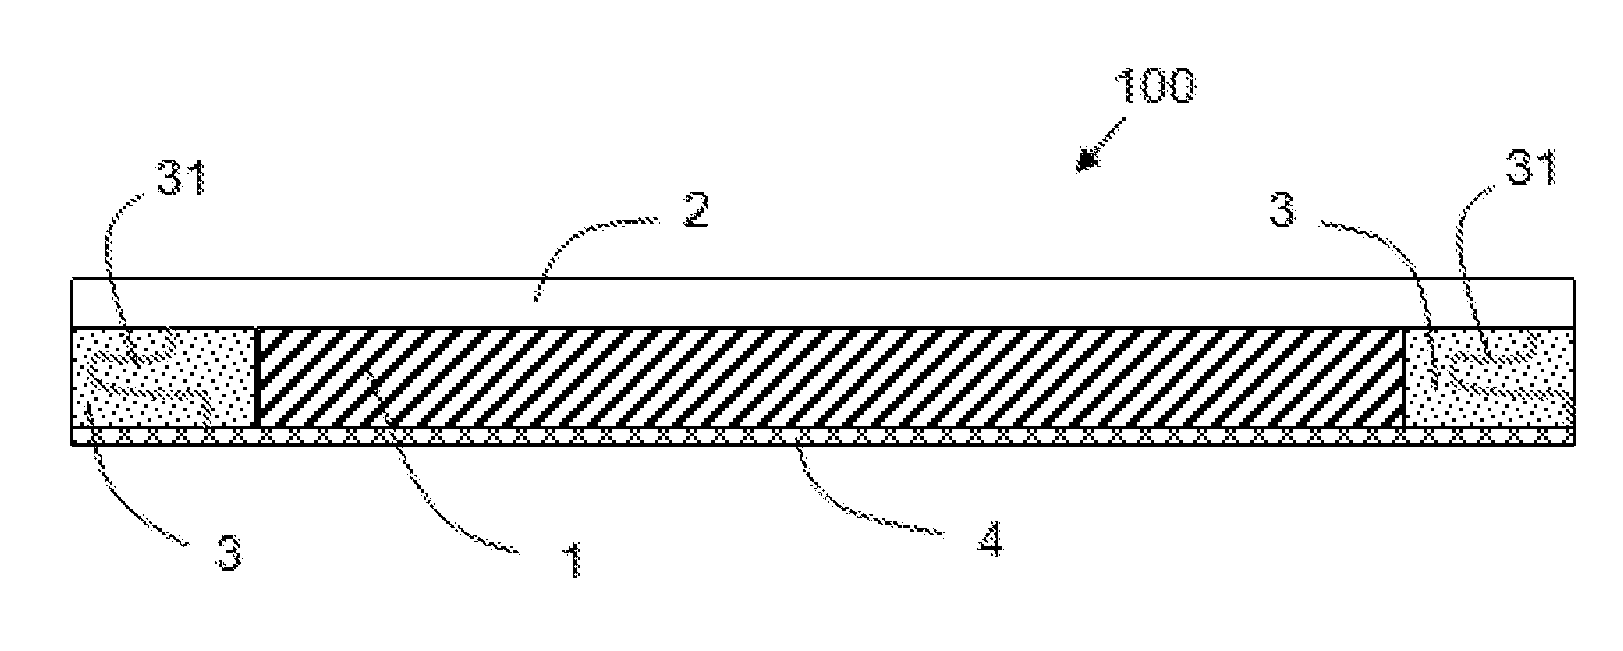 Multilayer lining plate for horizontal support surfaces and method of manufacturing same